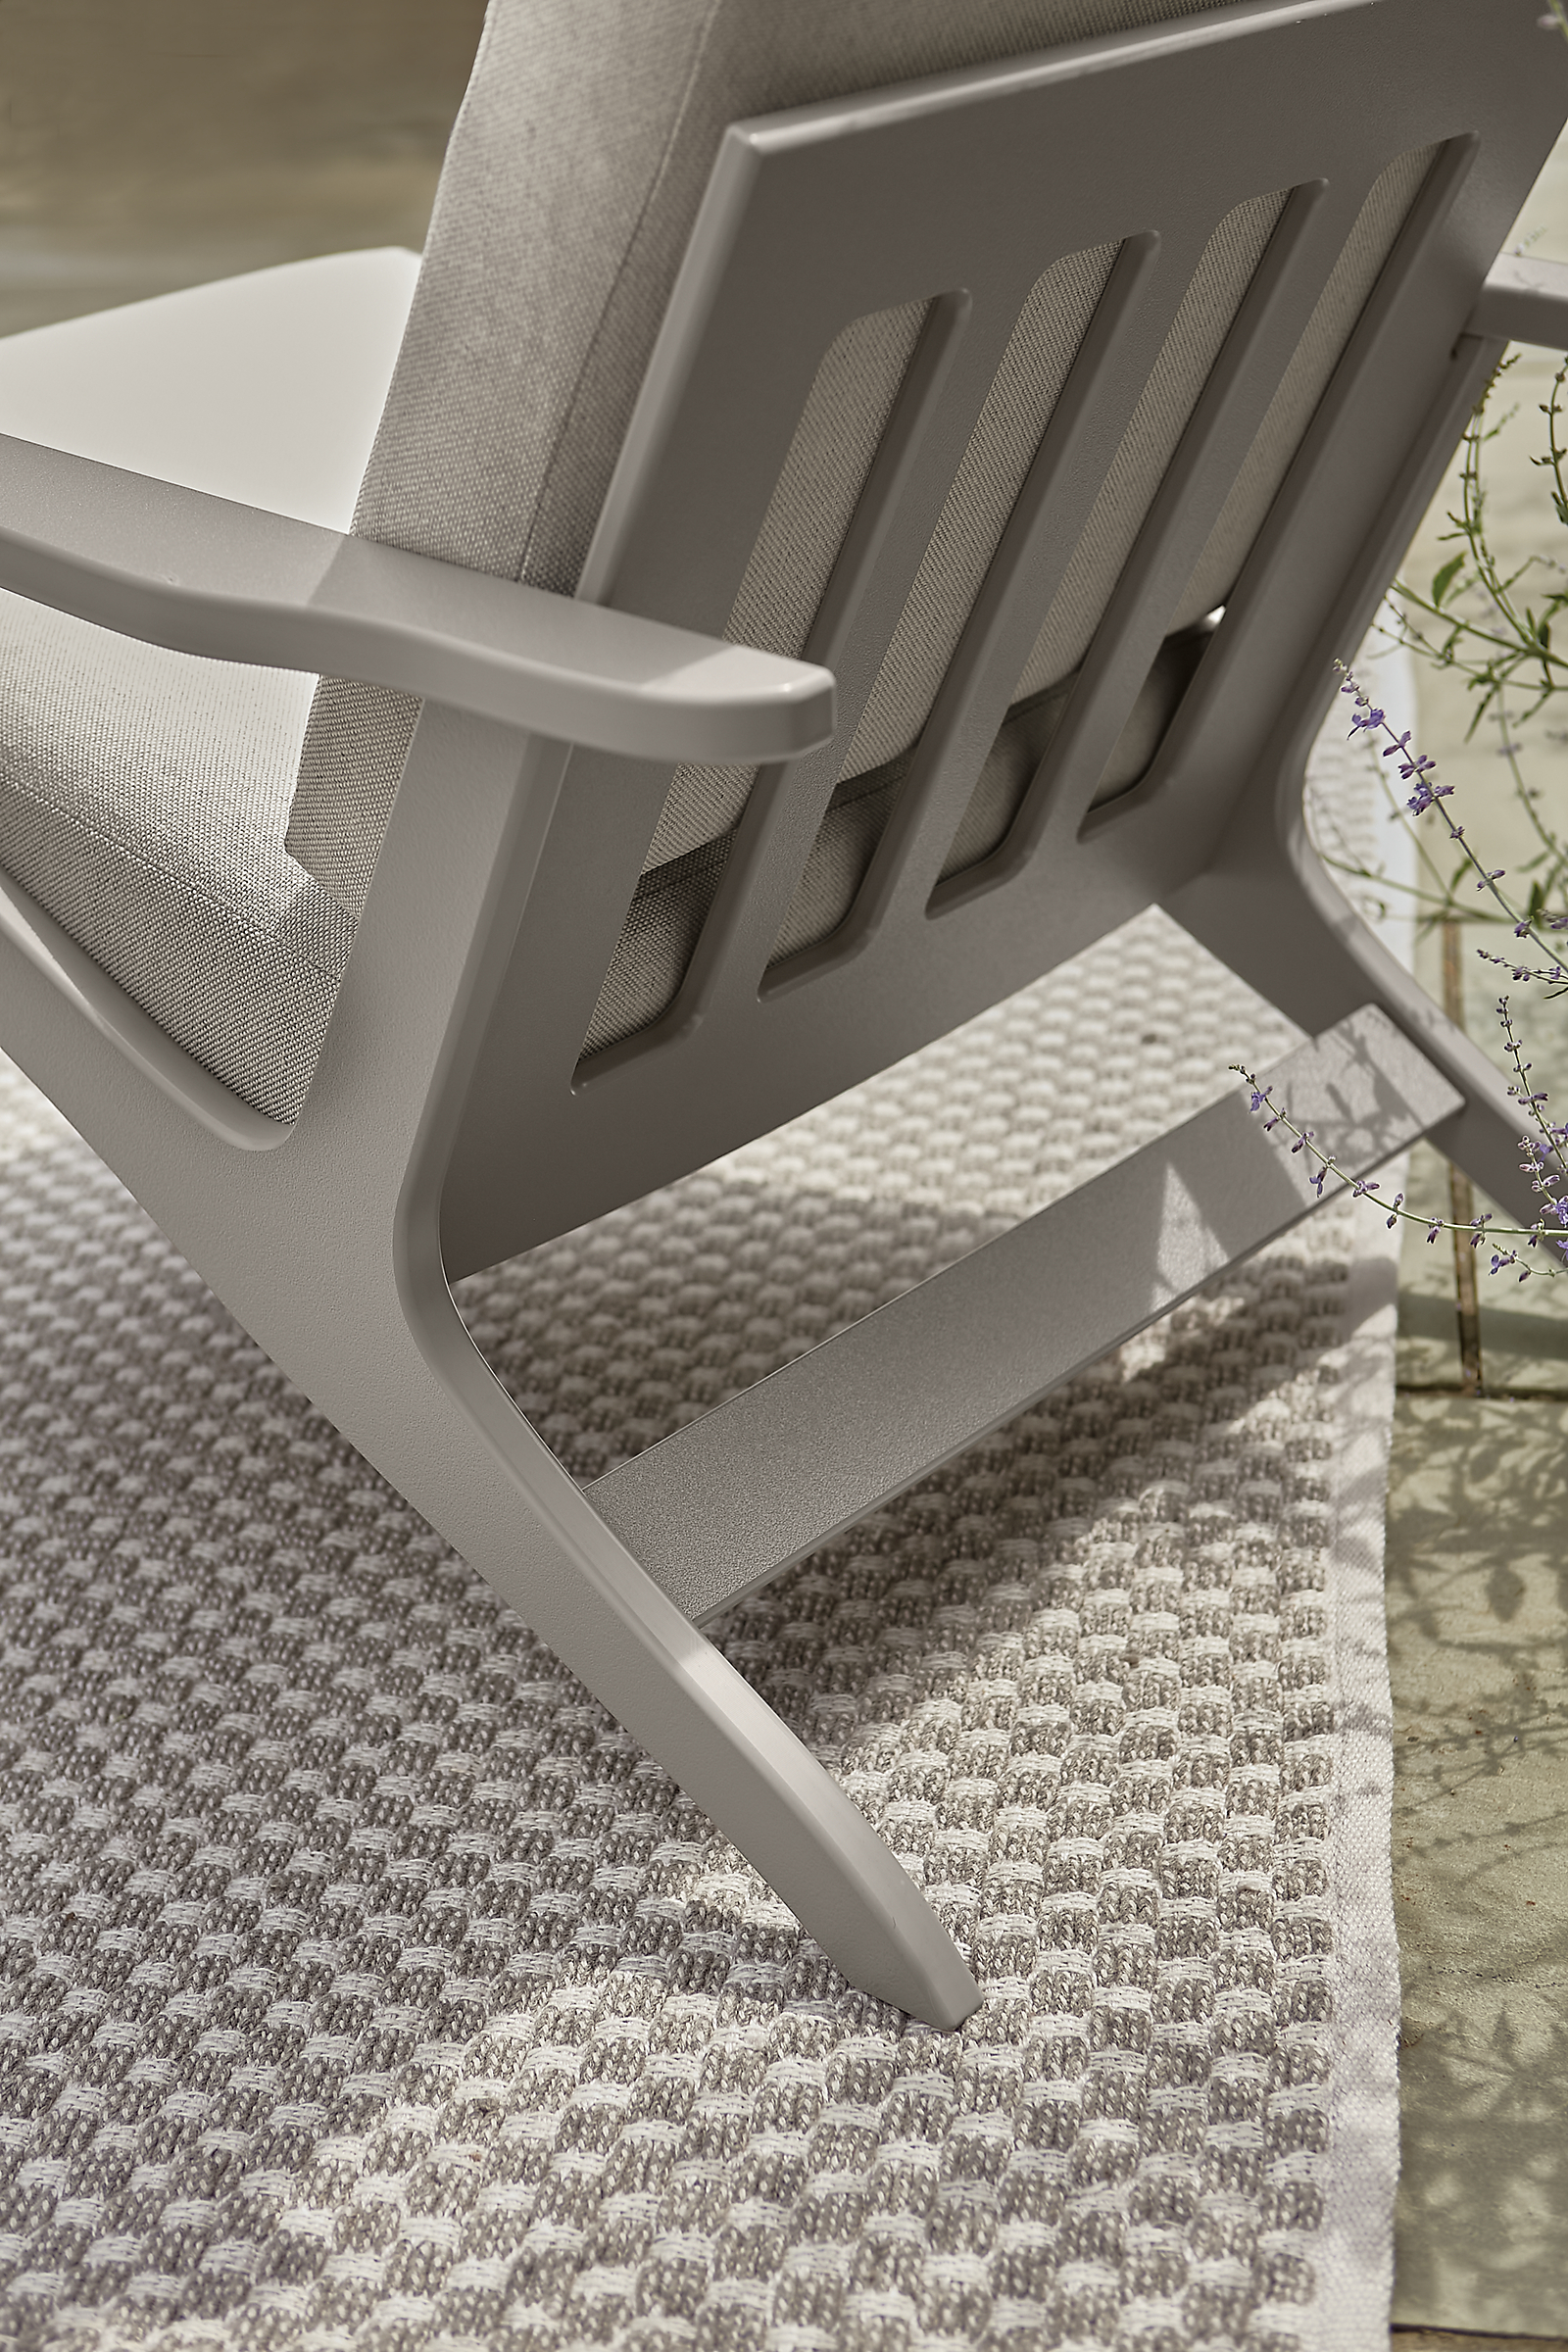 detail of back of breeze chair on weldon rug in outdoor space.